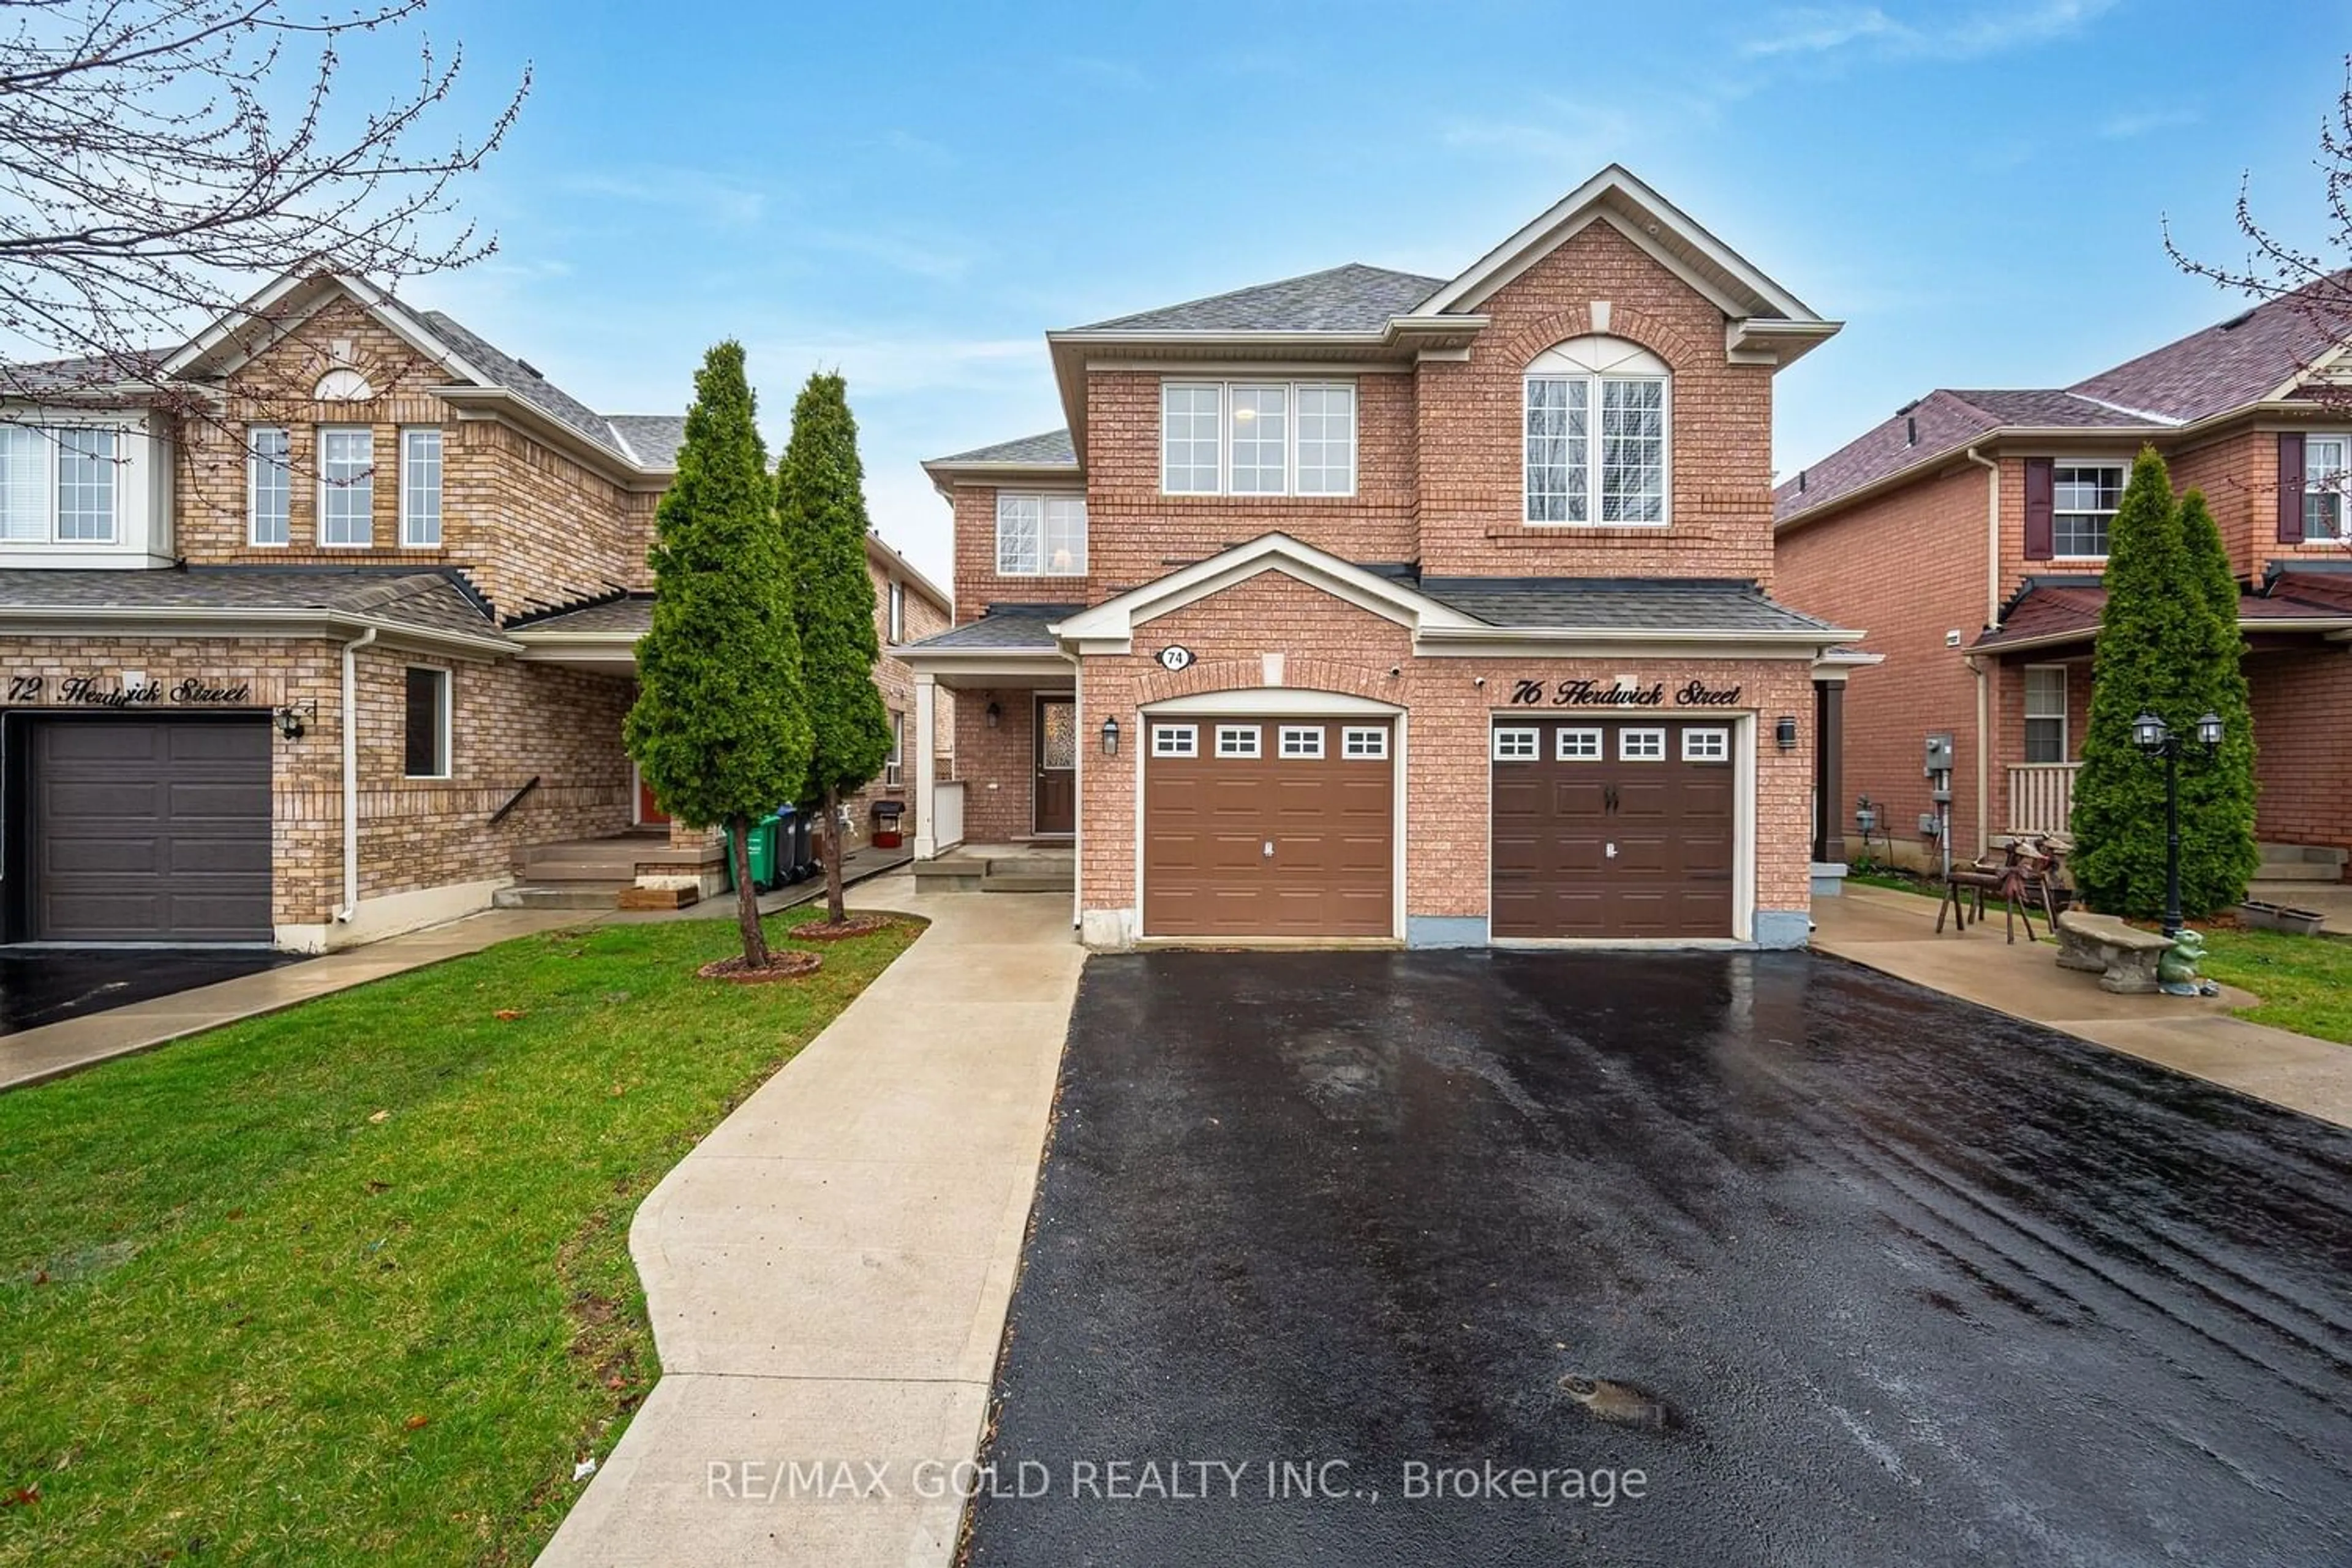 Frontside or backside of a home for 74 Herdwick St, Brampton Ontario L6S 6M1